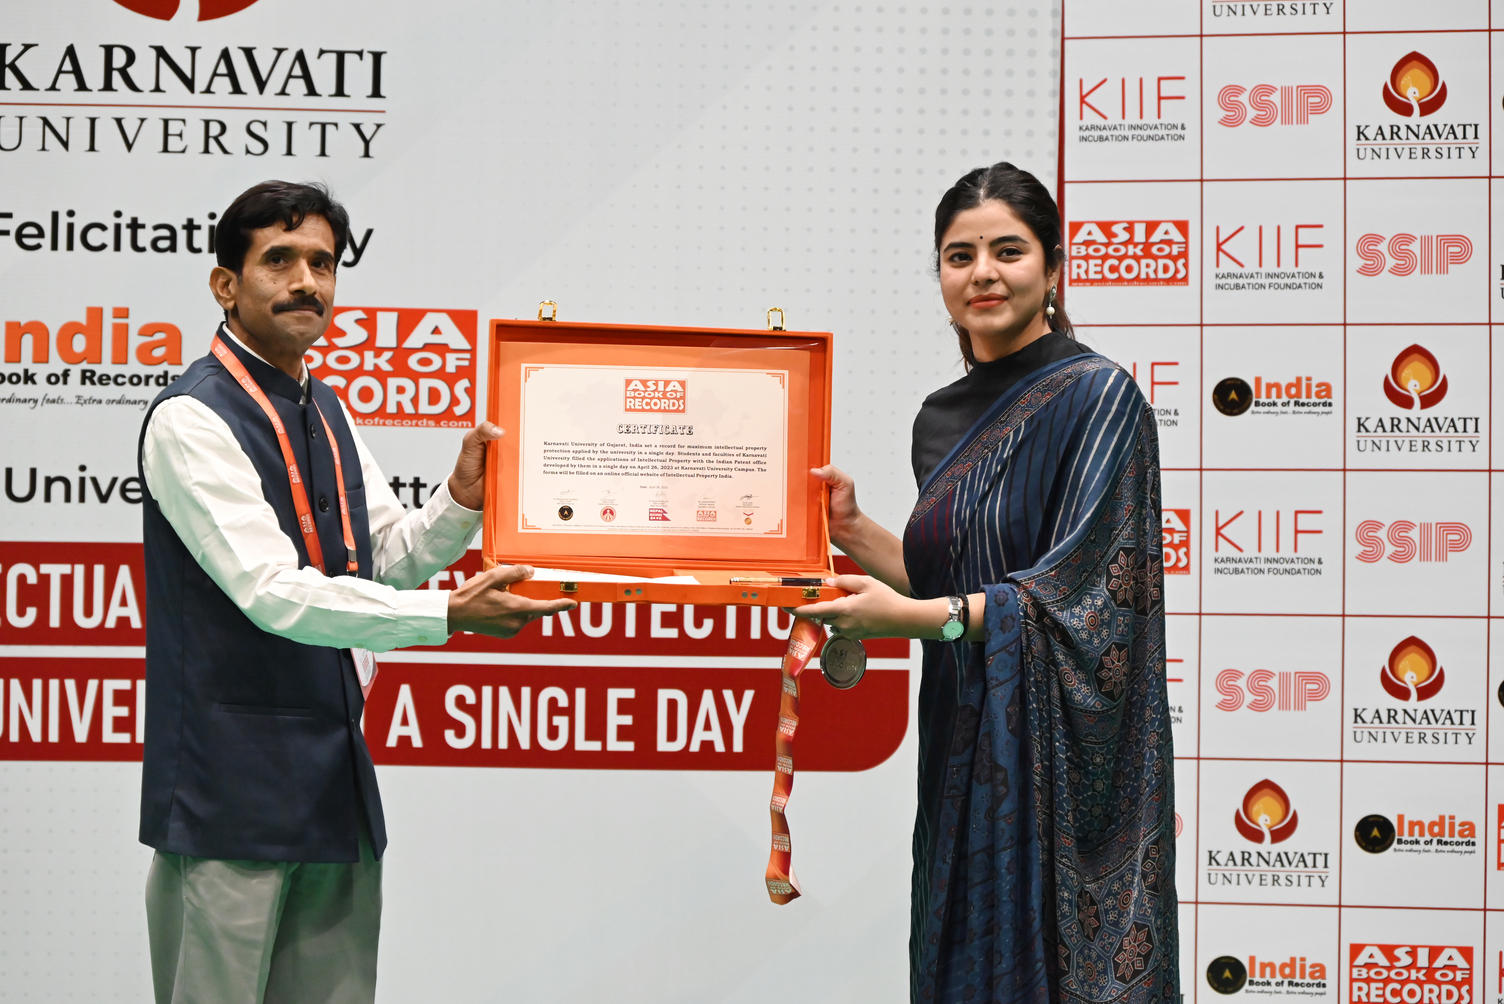 Gujarat-based Karnavati University felicitated by Asia Book of Records and India Book of Records for filing record 295 Intellectual Property Applications